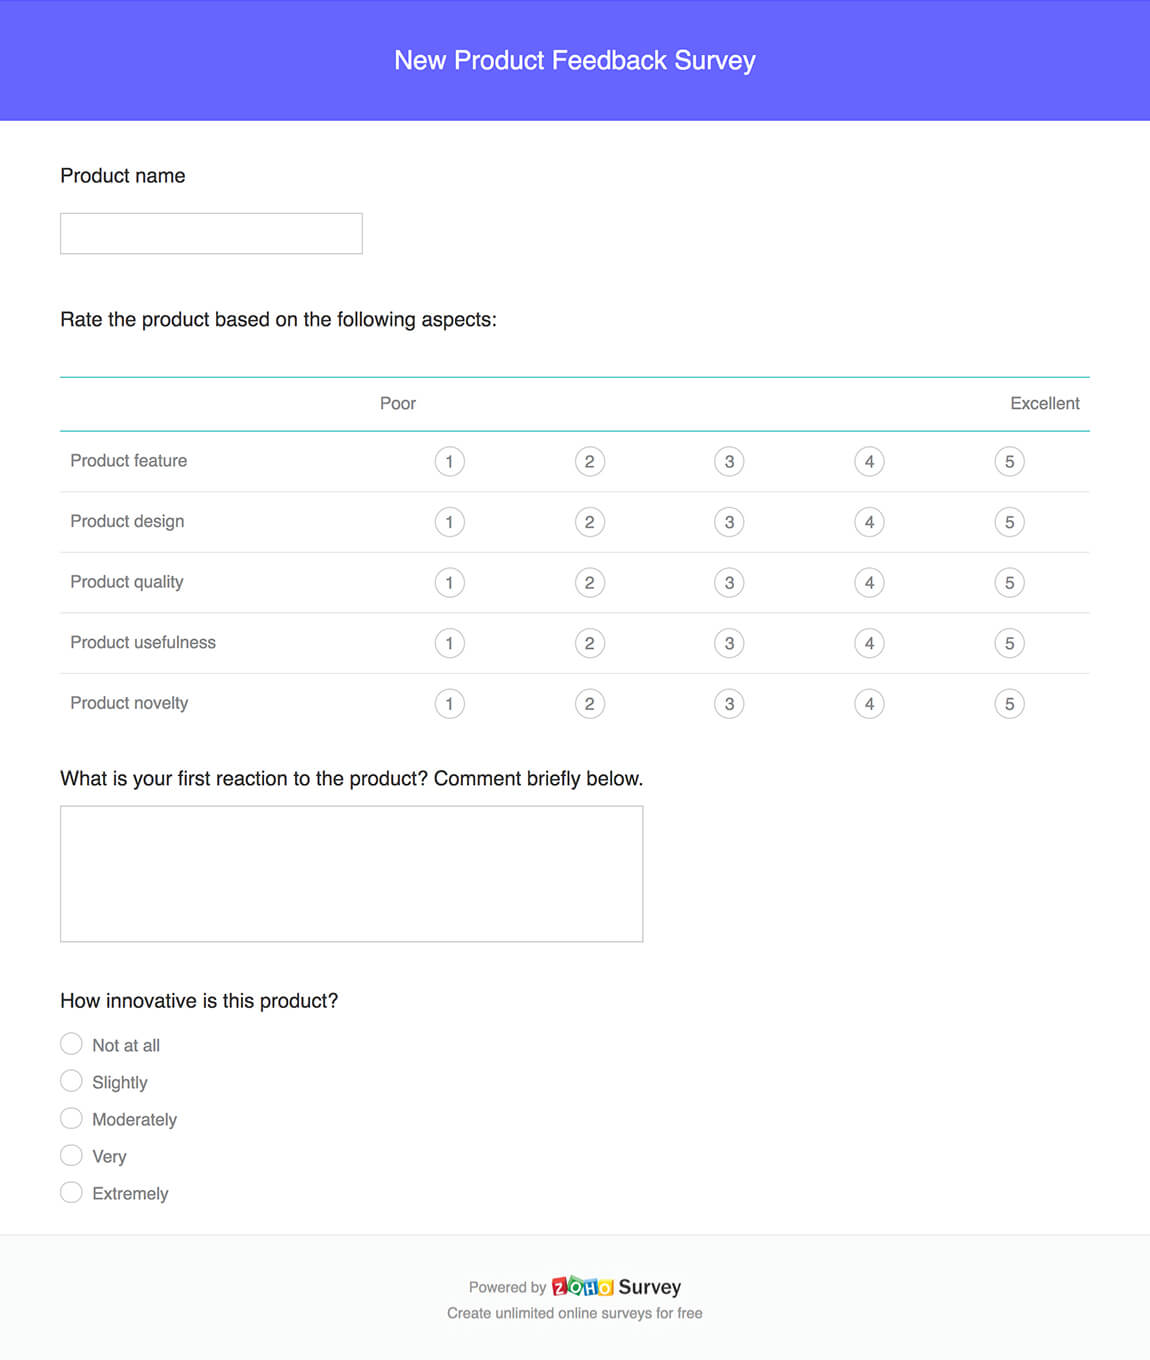 New product feedback survey questionnaire template